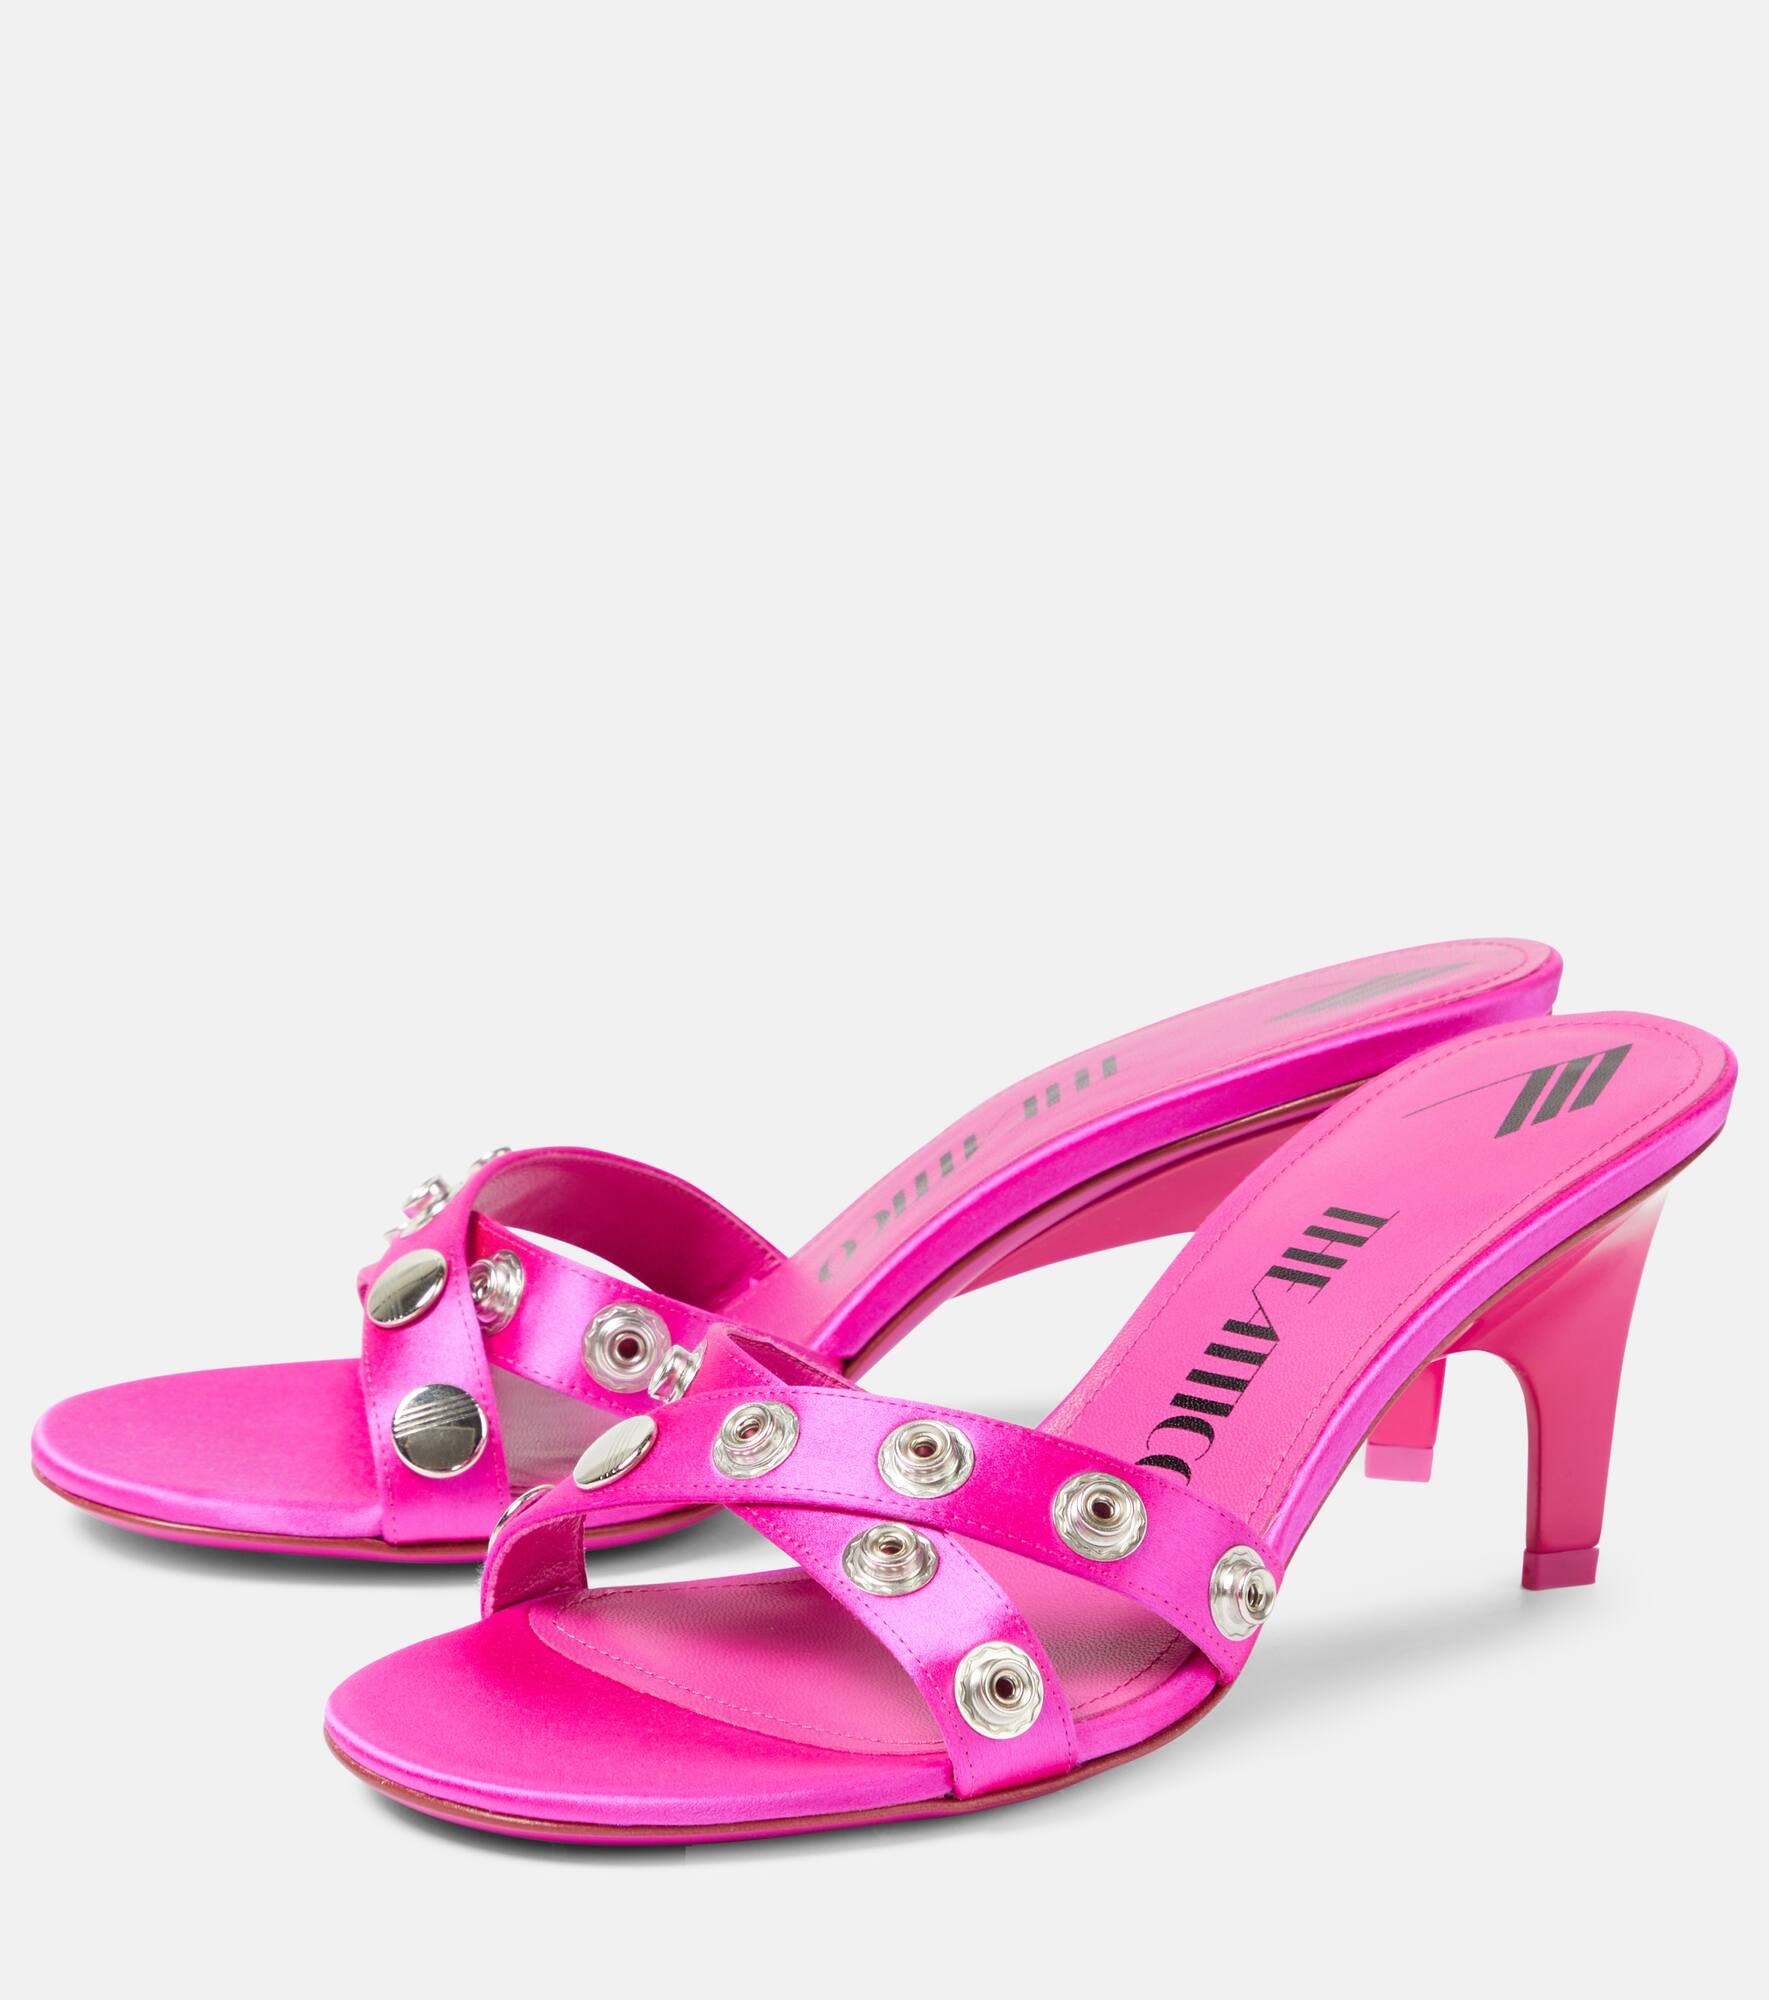 Cosmo 60 studded satin sandals - 5